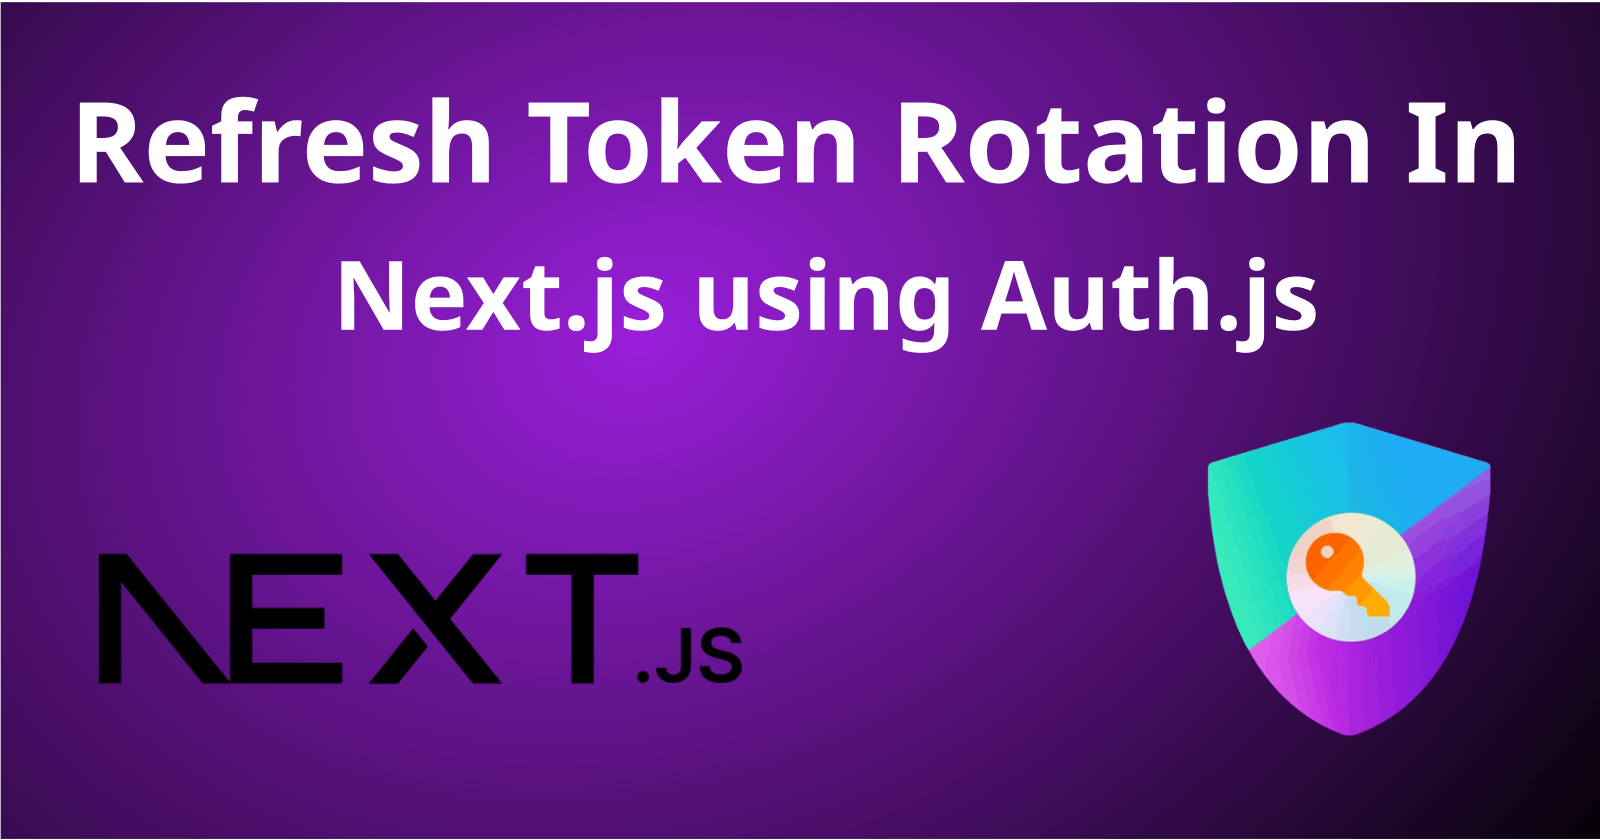 Refresh Token rotation in Next.js using Auth.js